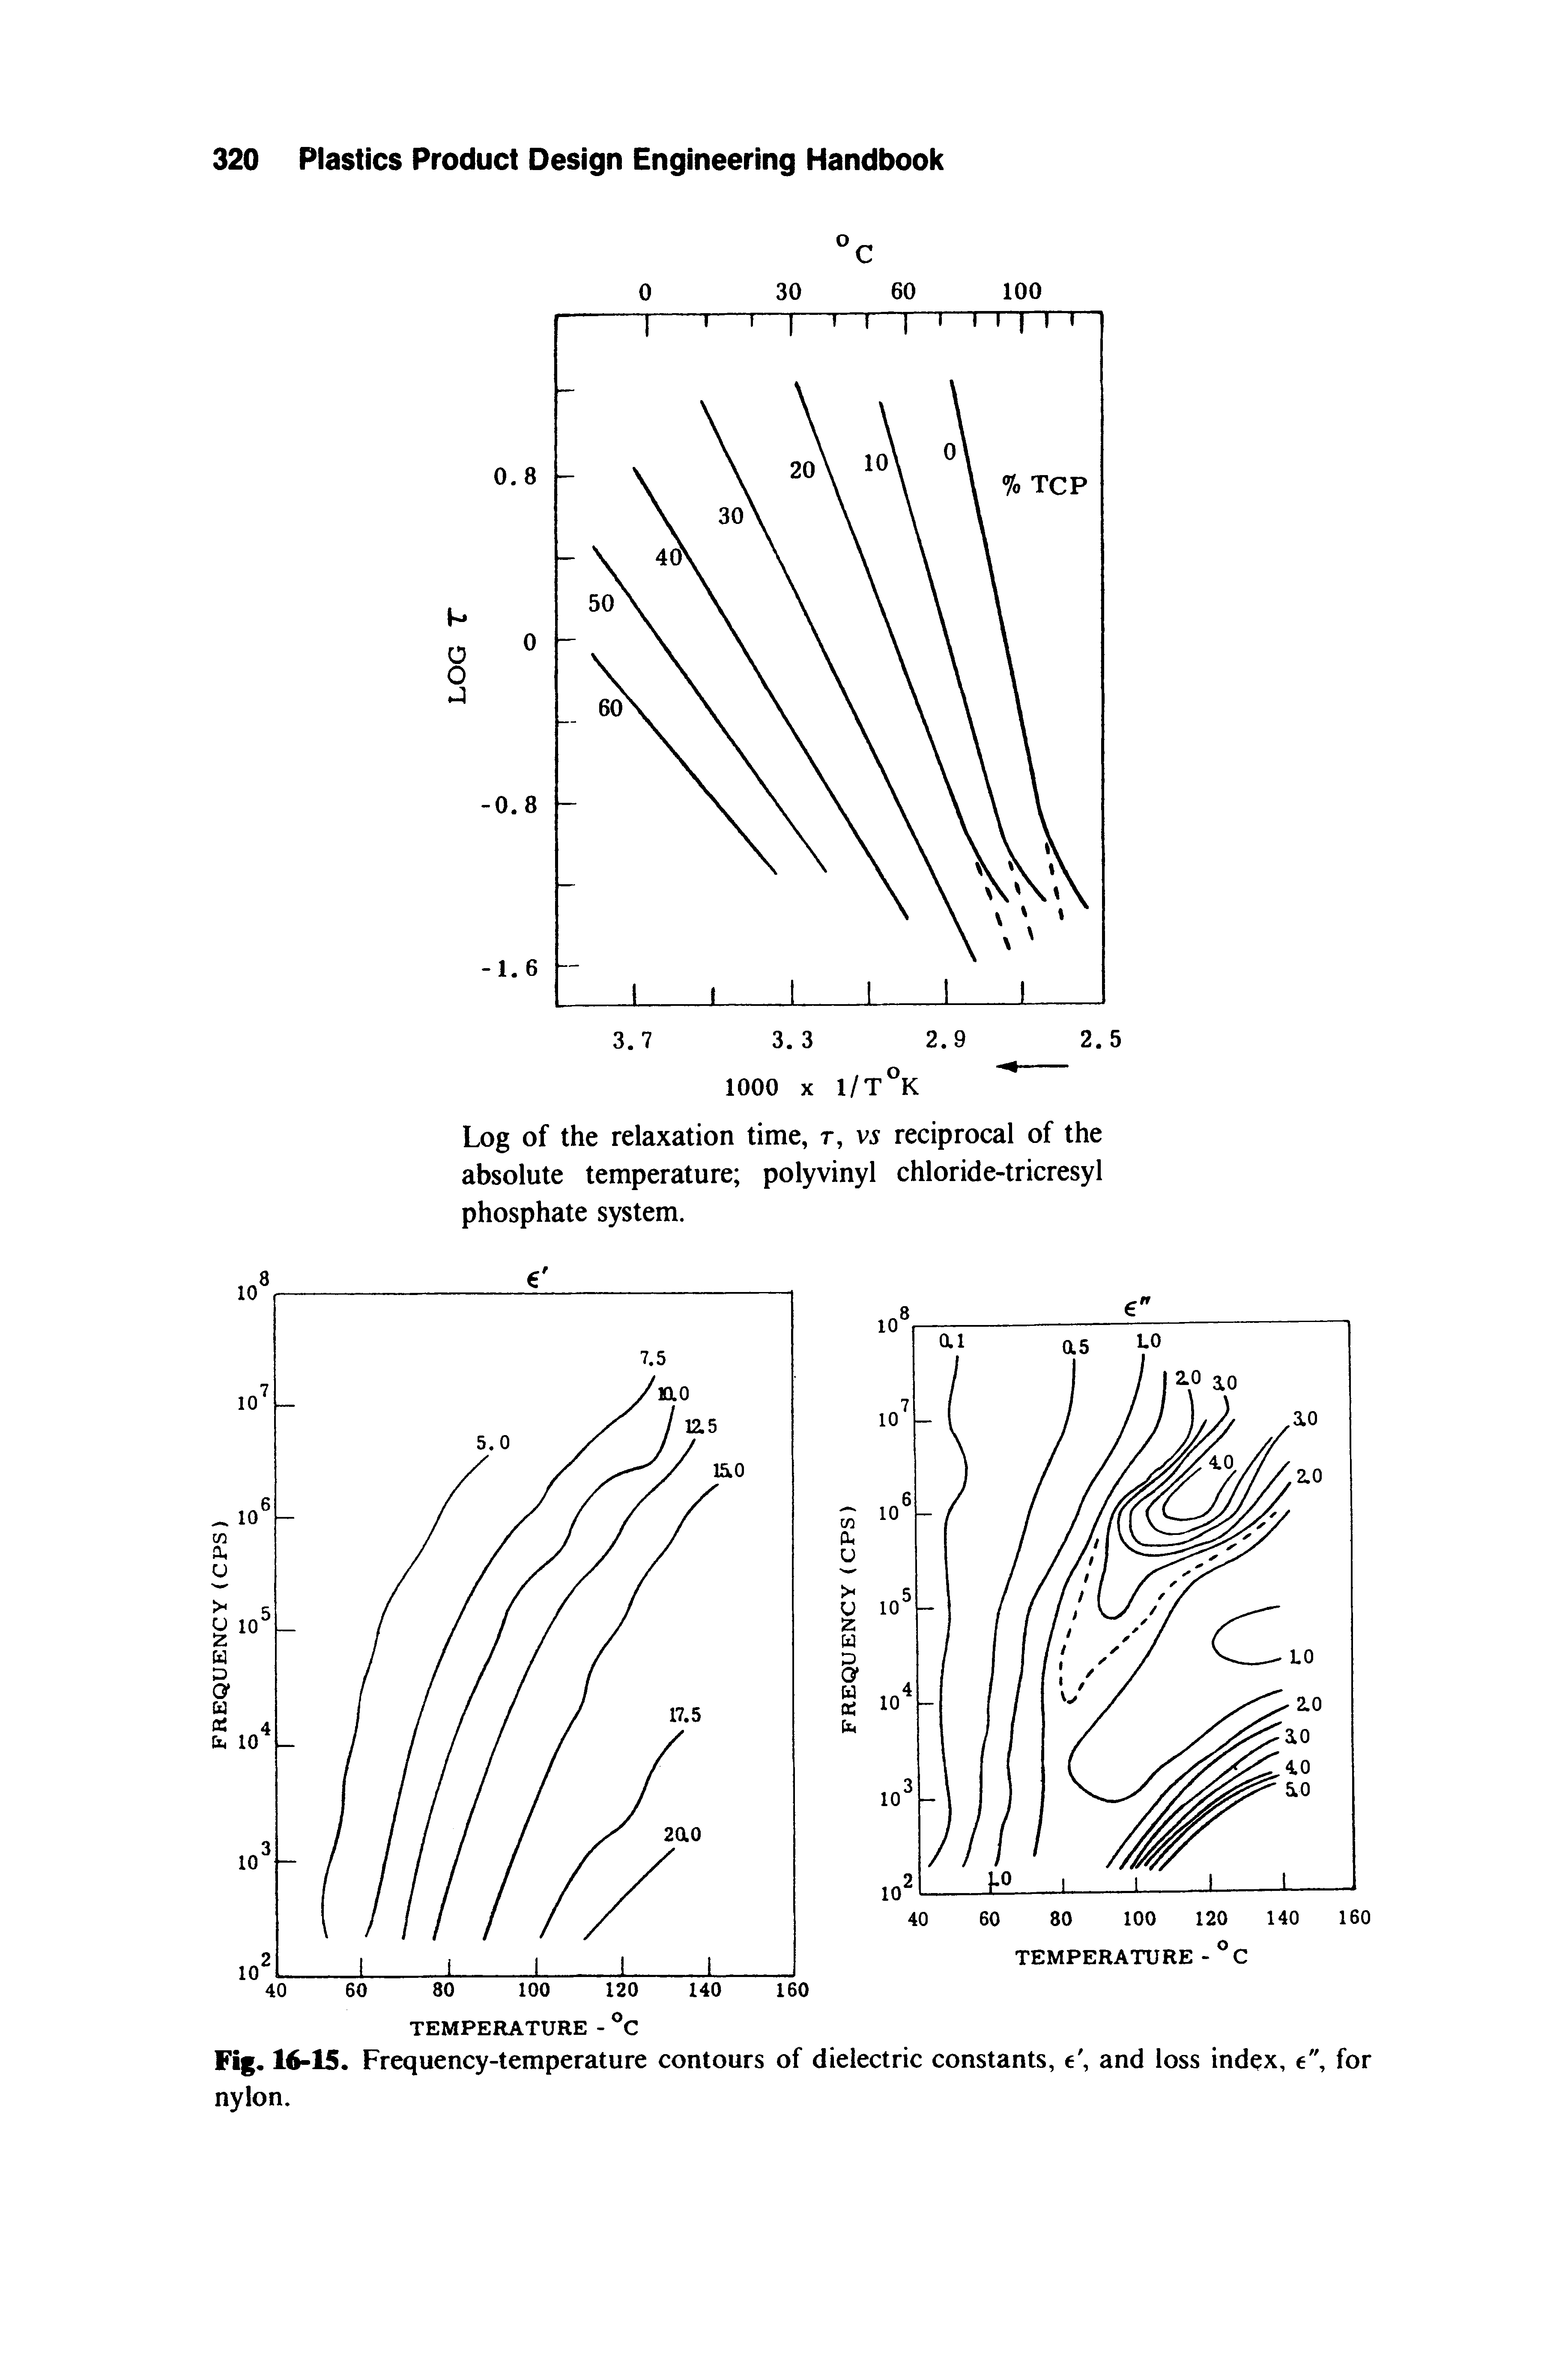 Fig. 16-15. Frequency-temperature contours of dielectric constants, e, and loss index, e", for nylon.